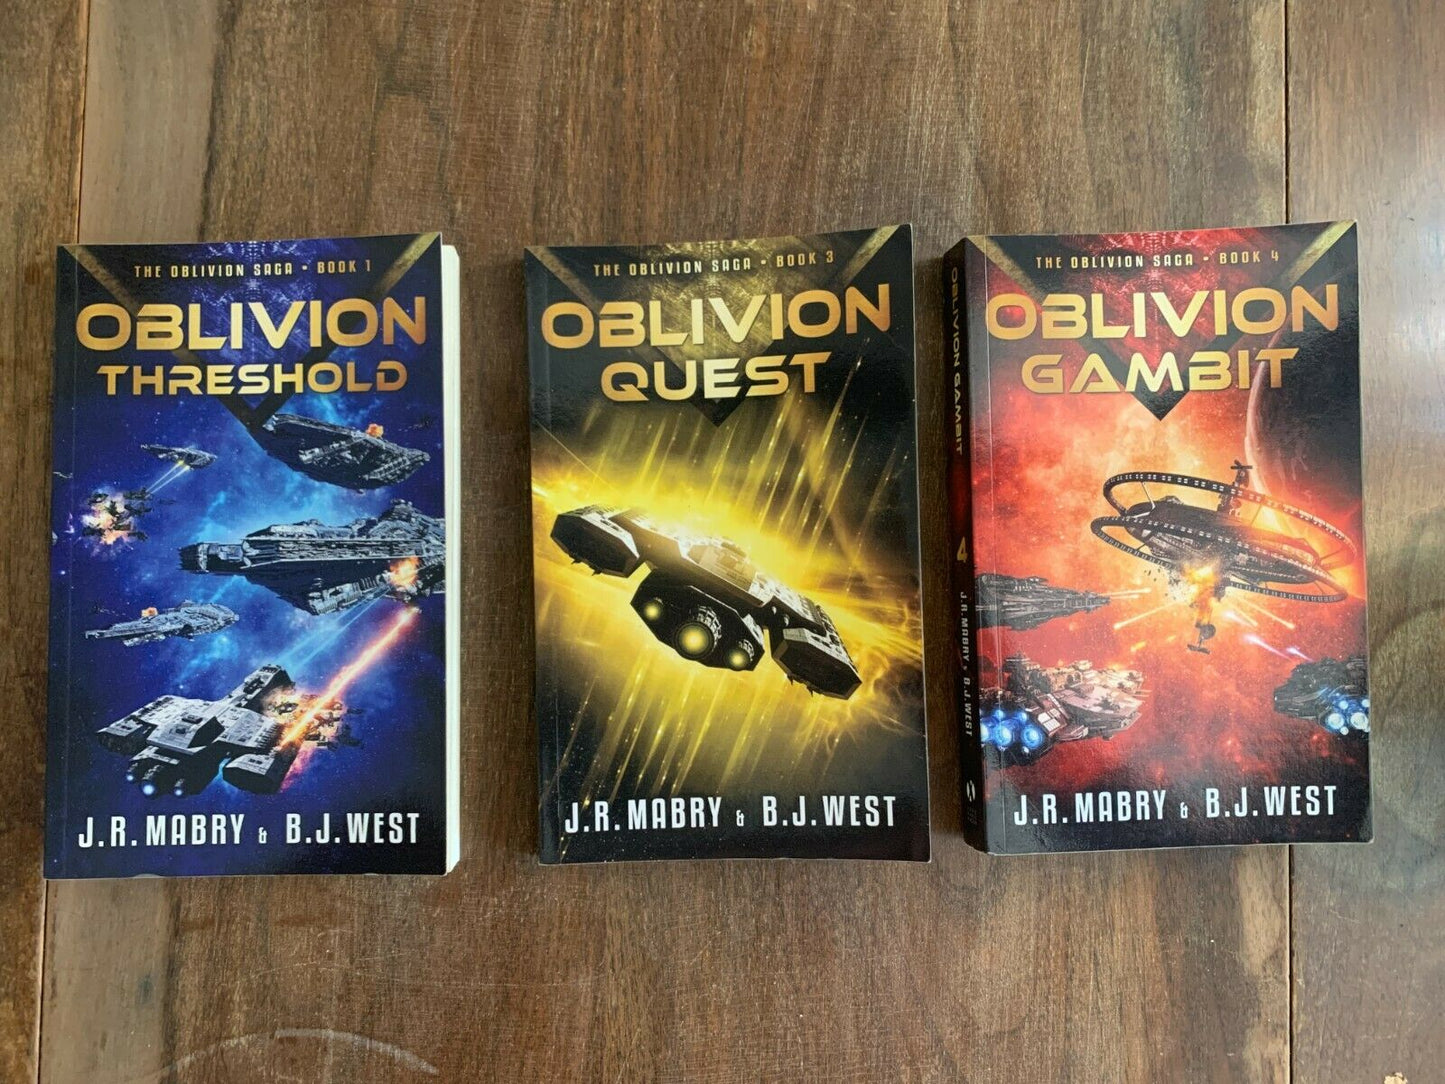 Oblivion Trilogy - Gambit, Threshold, Quest by J.R. Mabry